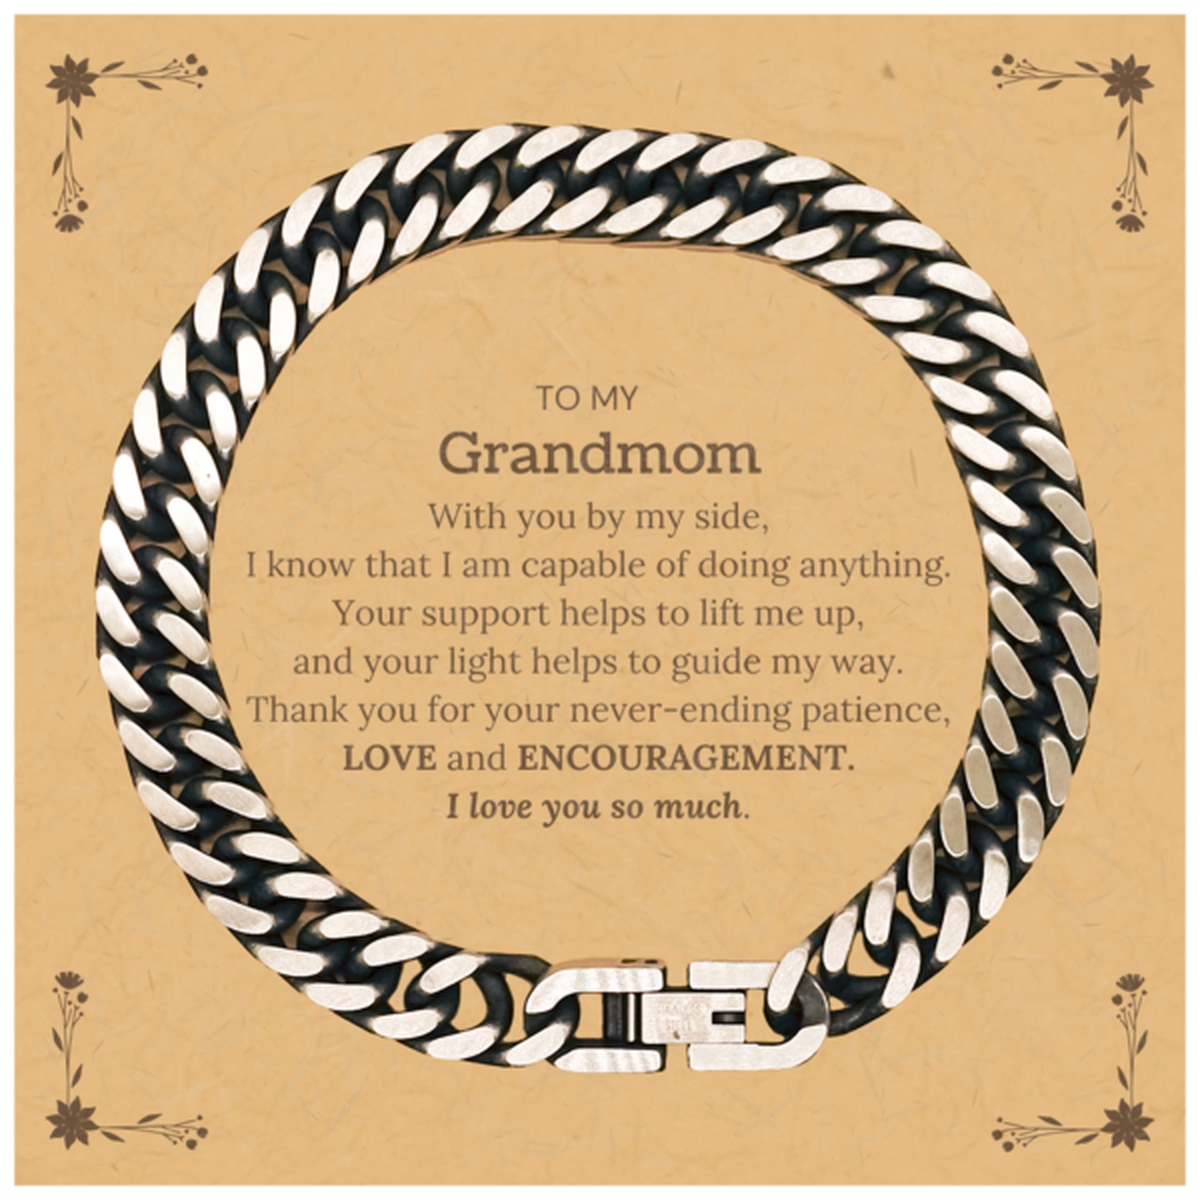 Appreciation Grandmom Cuban Link Chain Bracelet Gifts, To My Grandmom Birthday Christmas Wedding Keepsake Gifts for Grandmom With you by my side, I know that I am capable of doing anything. I love you so much